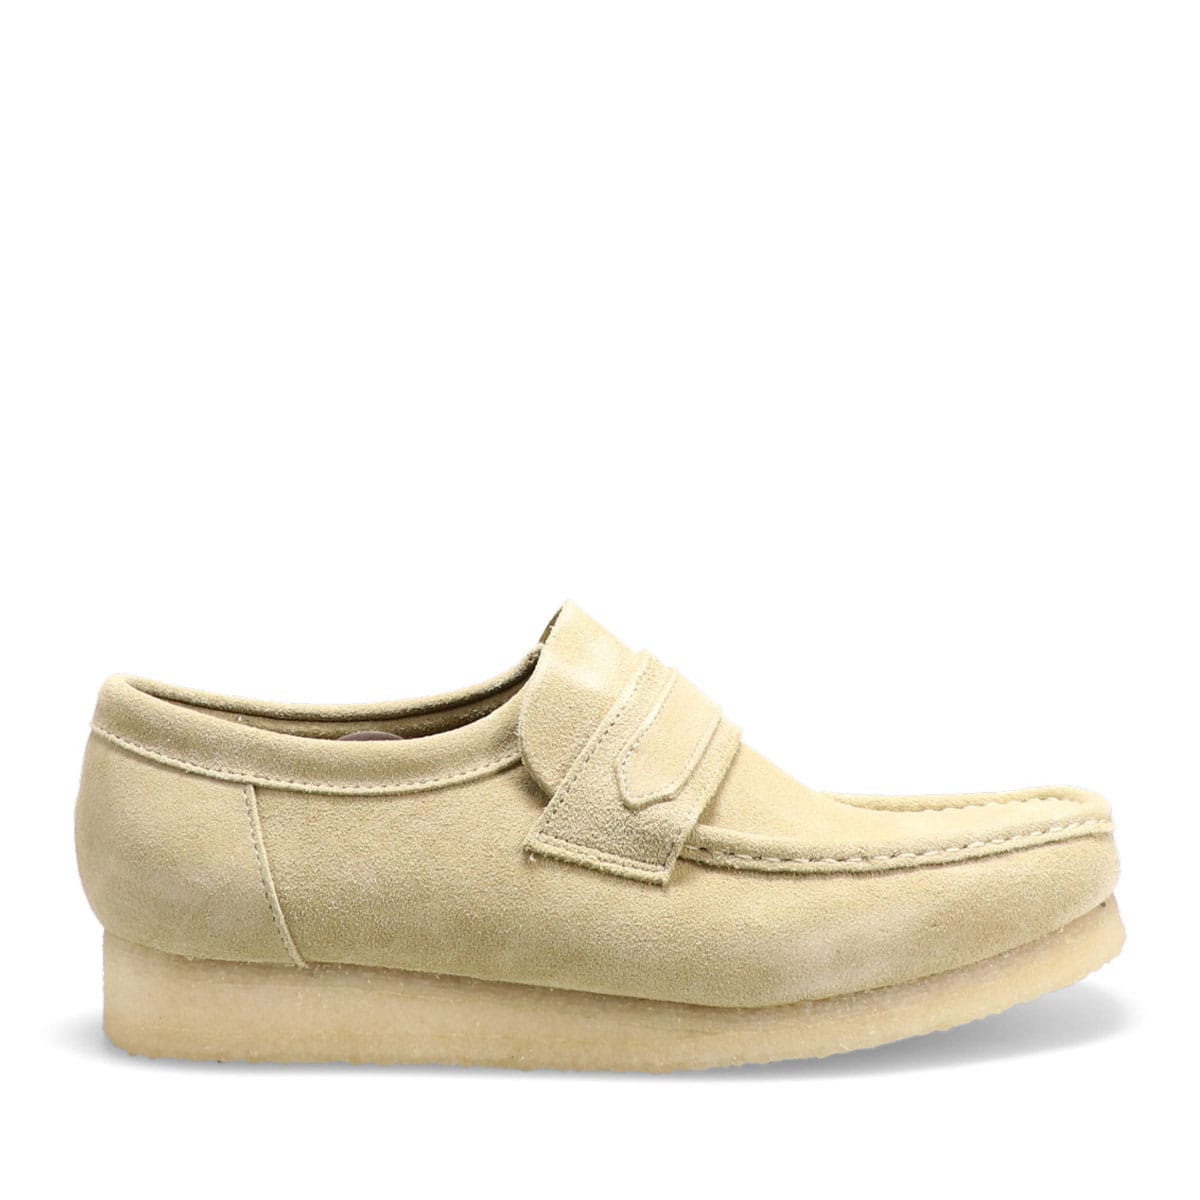 Clarks WallabeeLoafer Maple Suede MAPLE 23FA-I